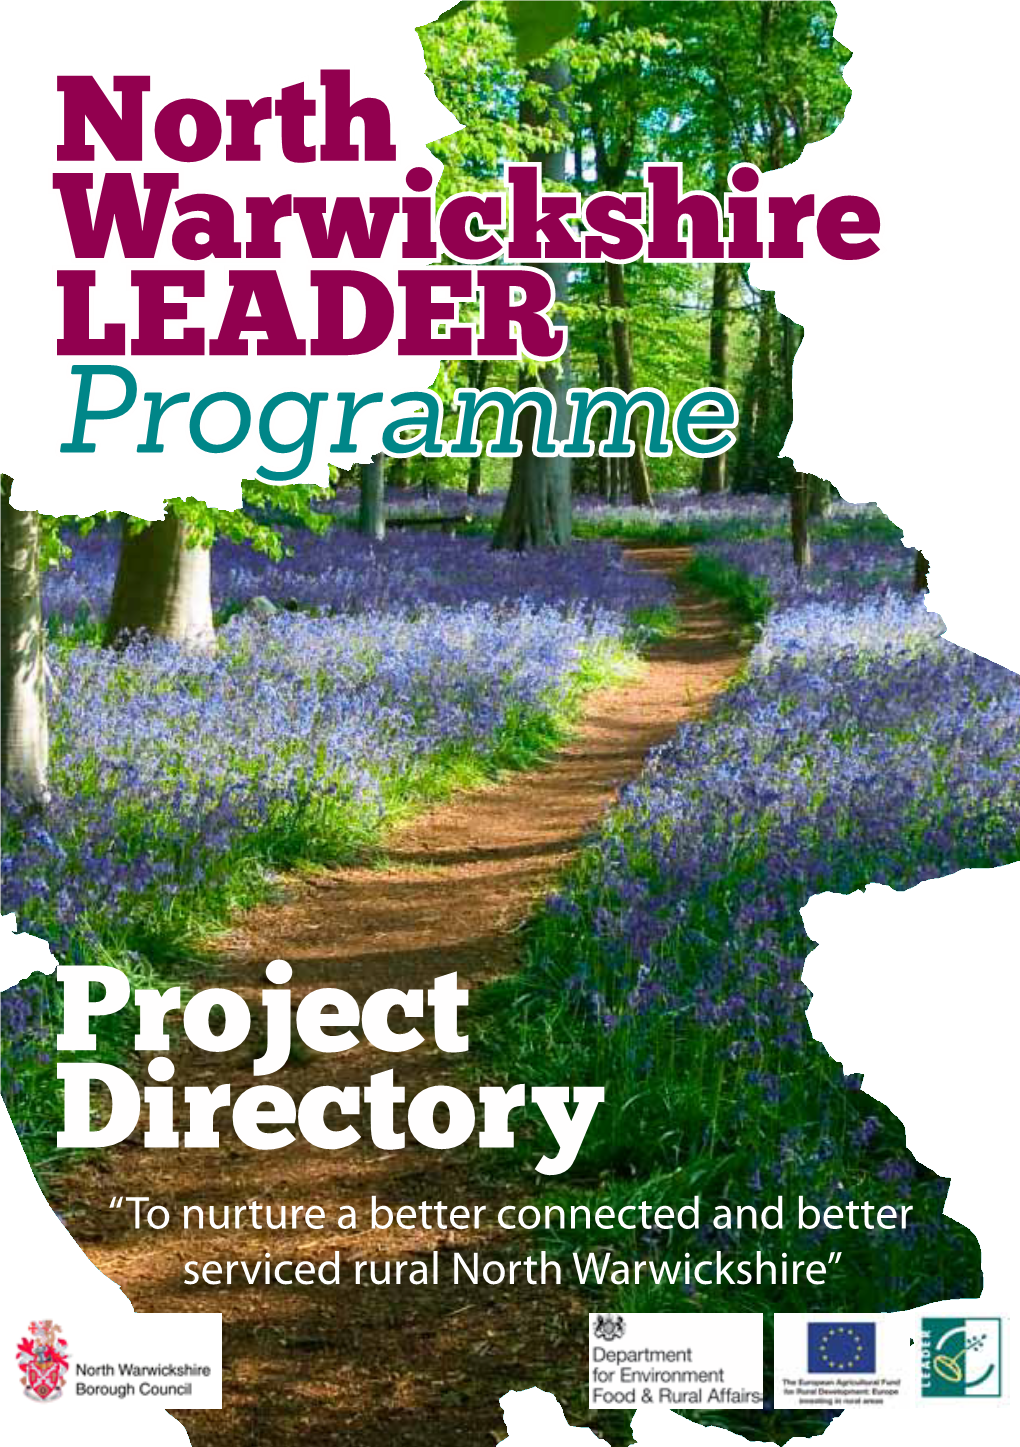 North Warwickshire LEADER Project Directory